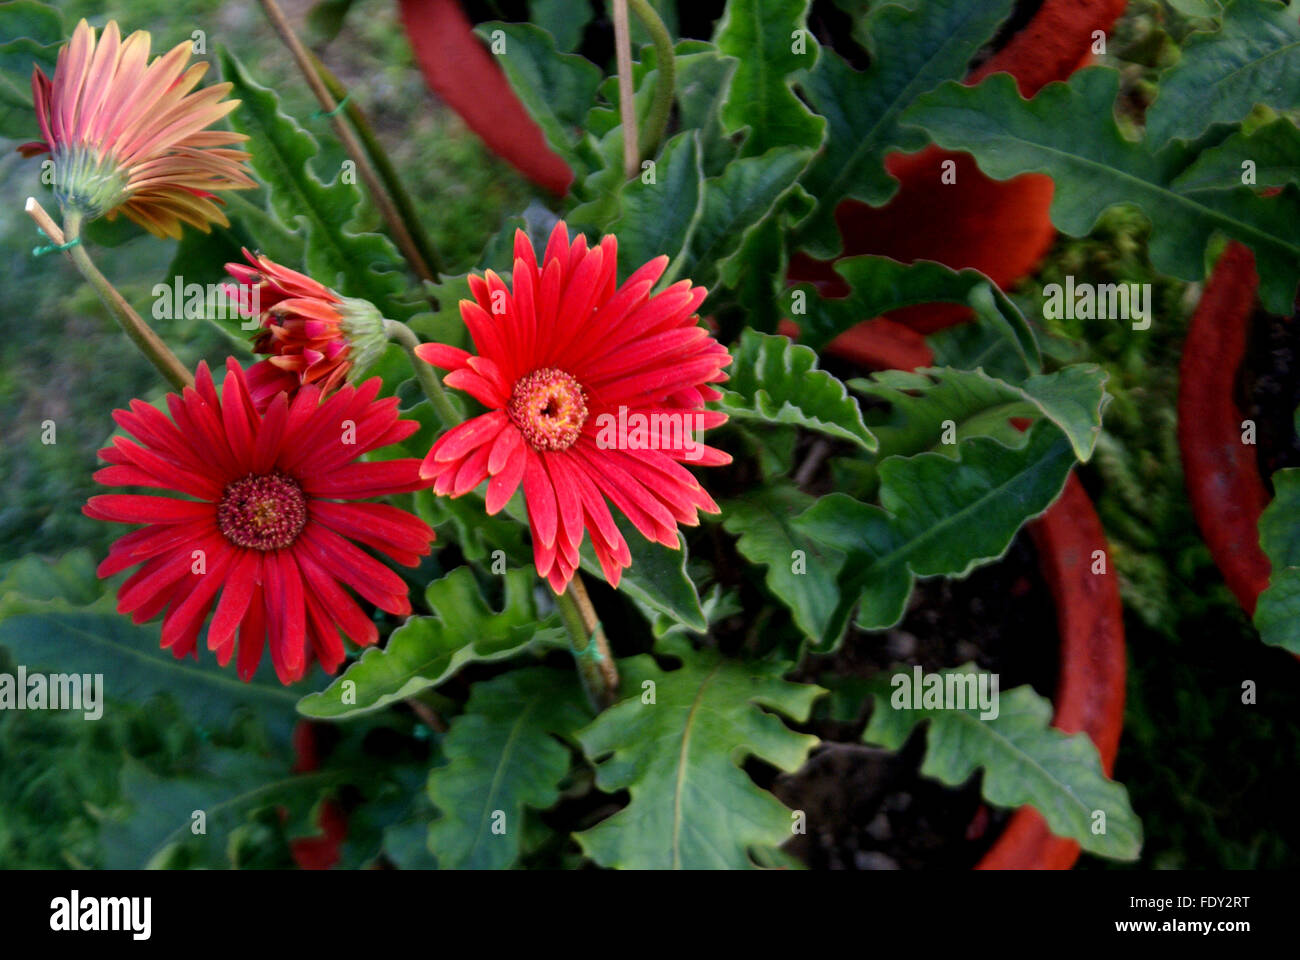 Gerbera jamesonii, Transvaal daisy, perennial ornamental herb with basal rosette of lobed leaves, radiate flower heads on scape Stock Photo